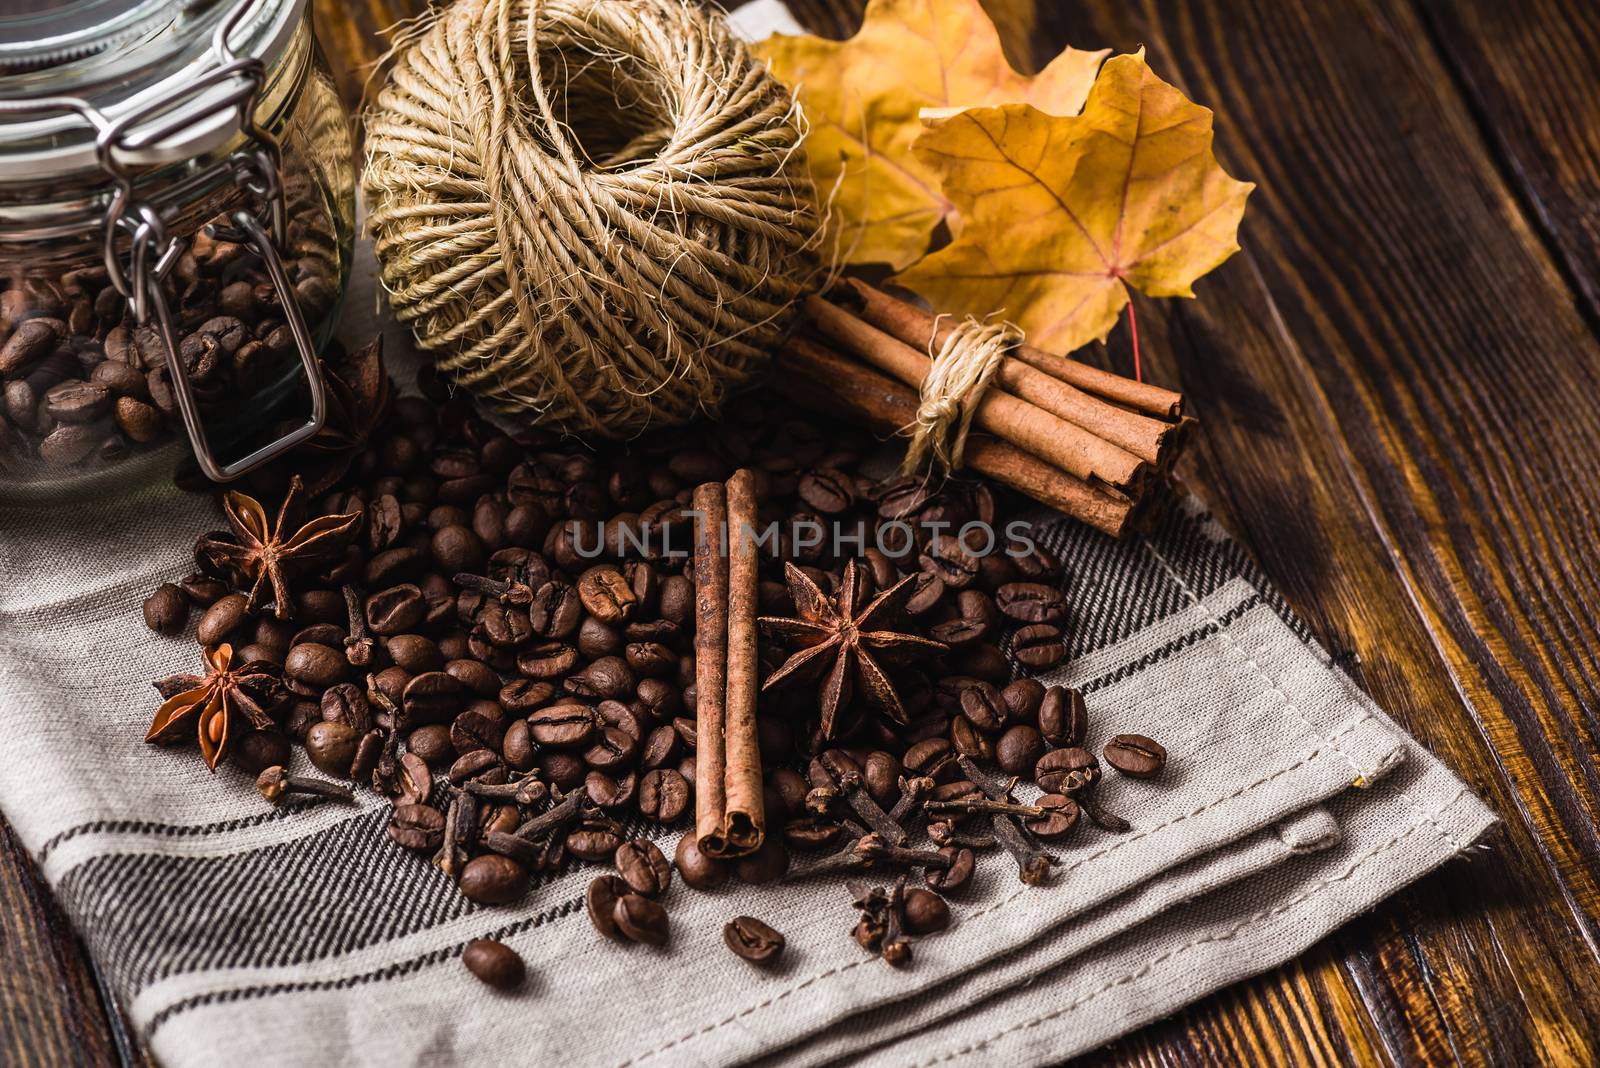 Coffee Beans with Autumn Leaves by Seva_blsv